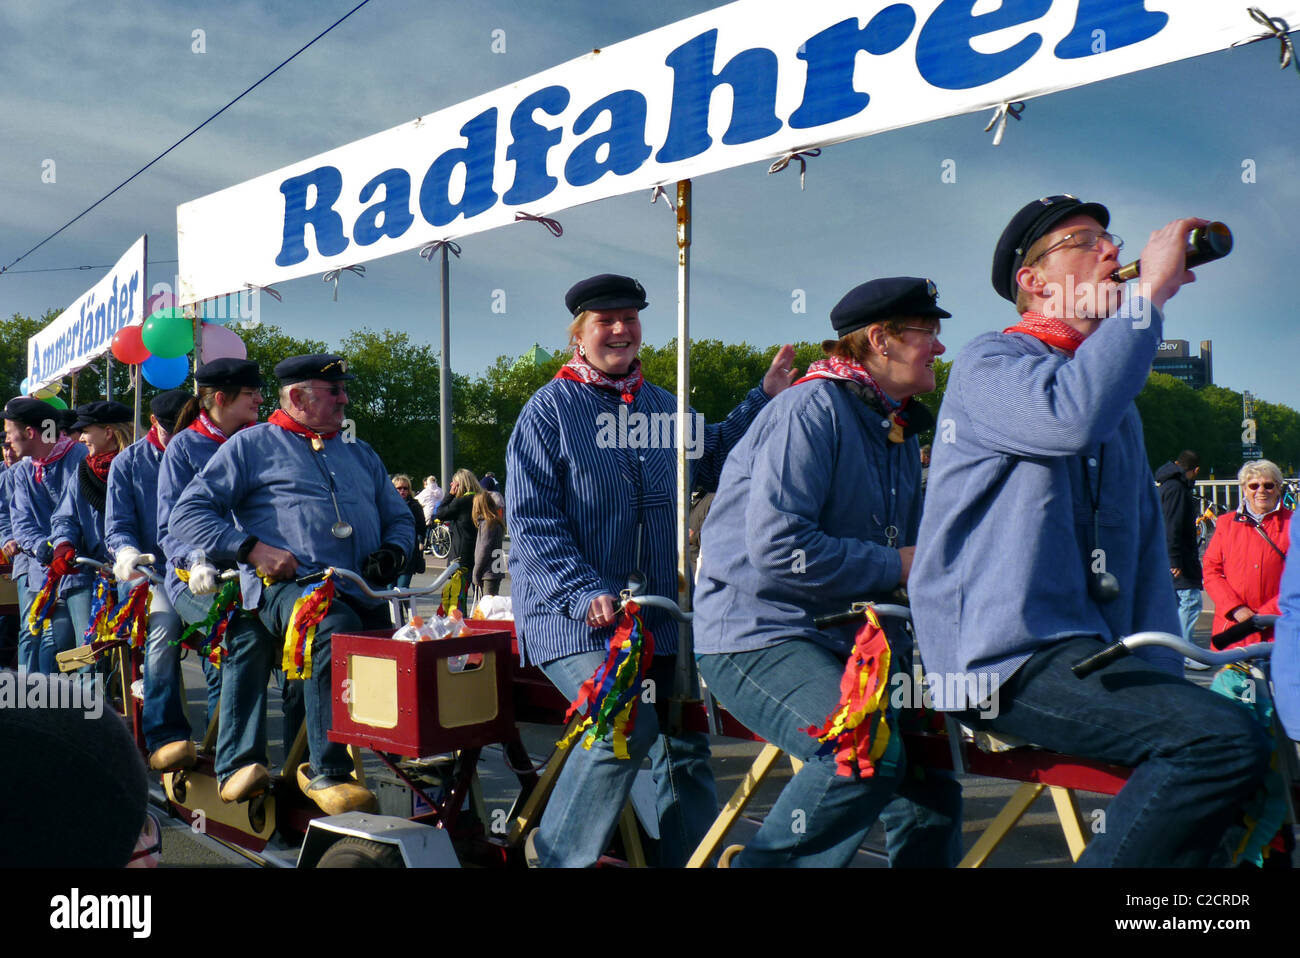 A group of people ride a multi-seat bicycle during the Freimarkt parade - Bremen, Germany Stock Photo